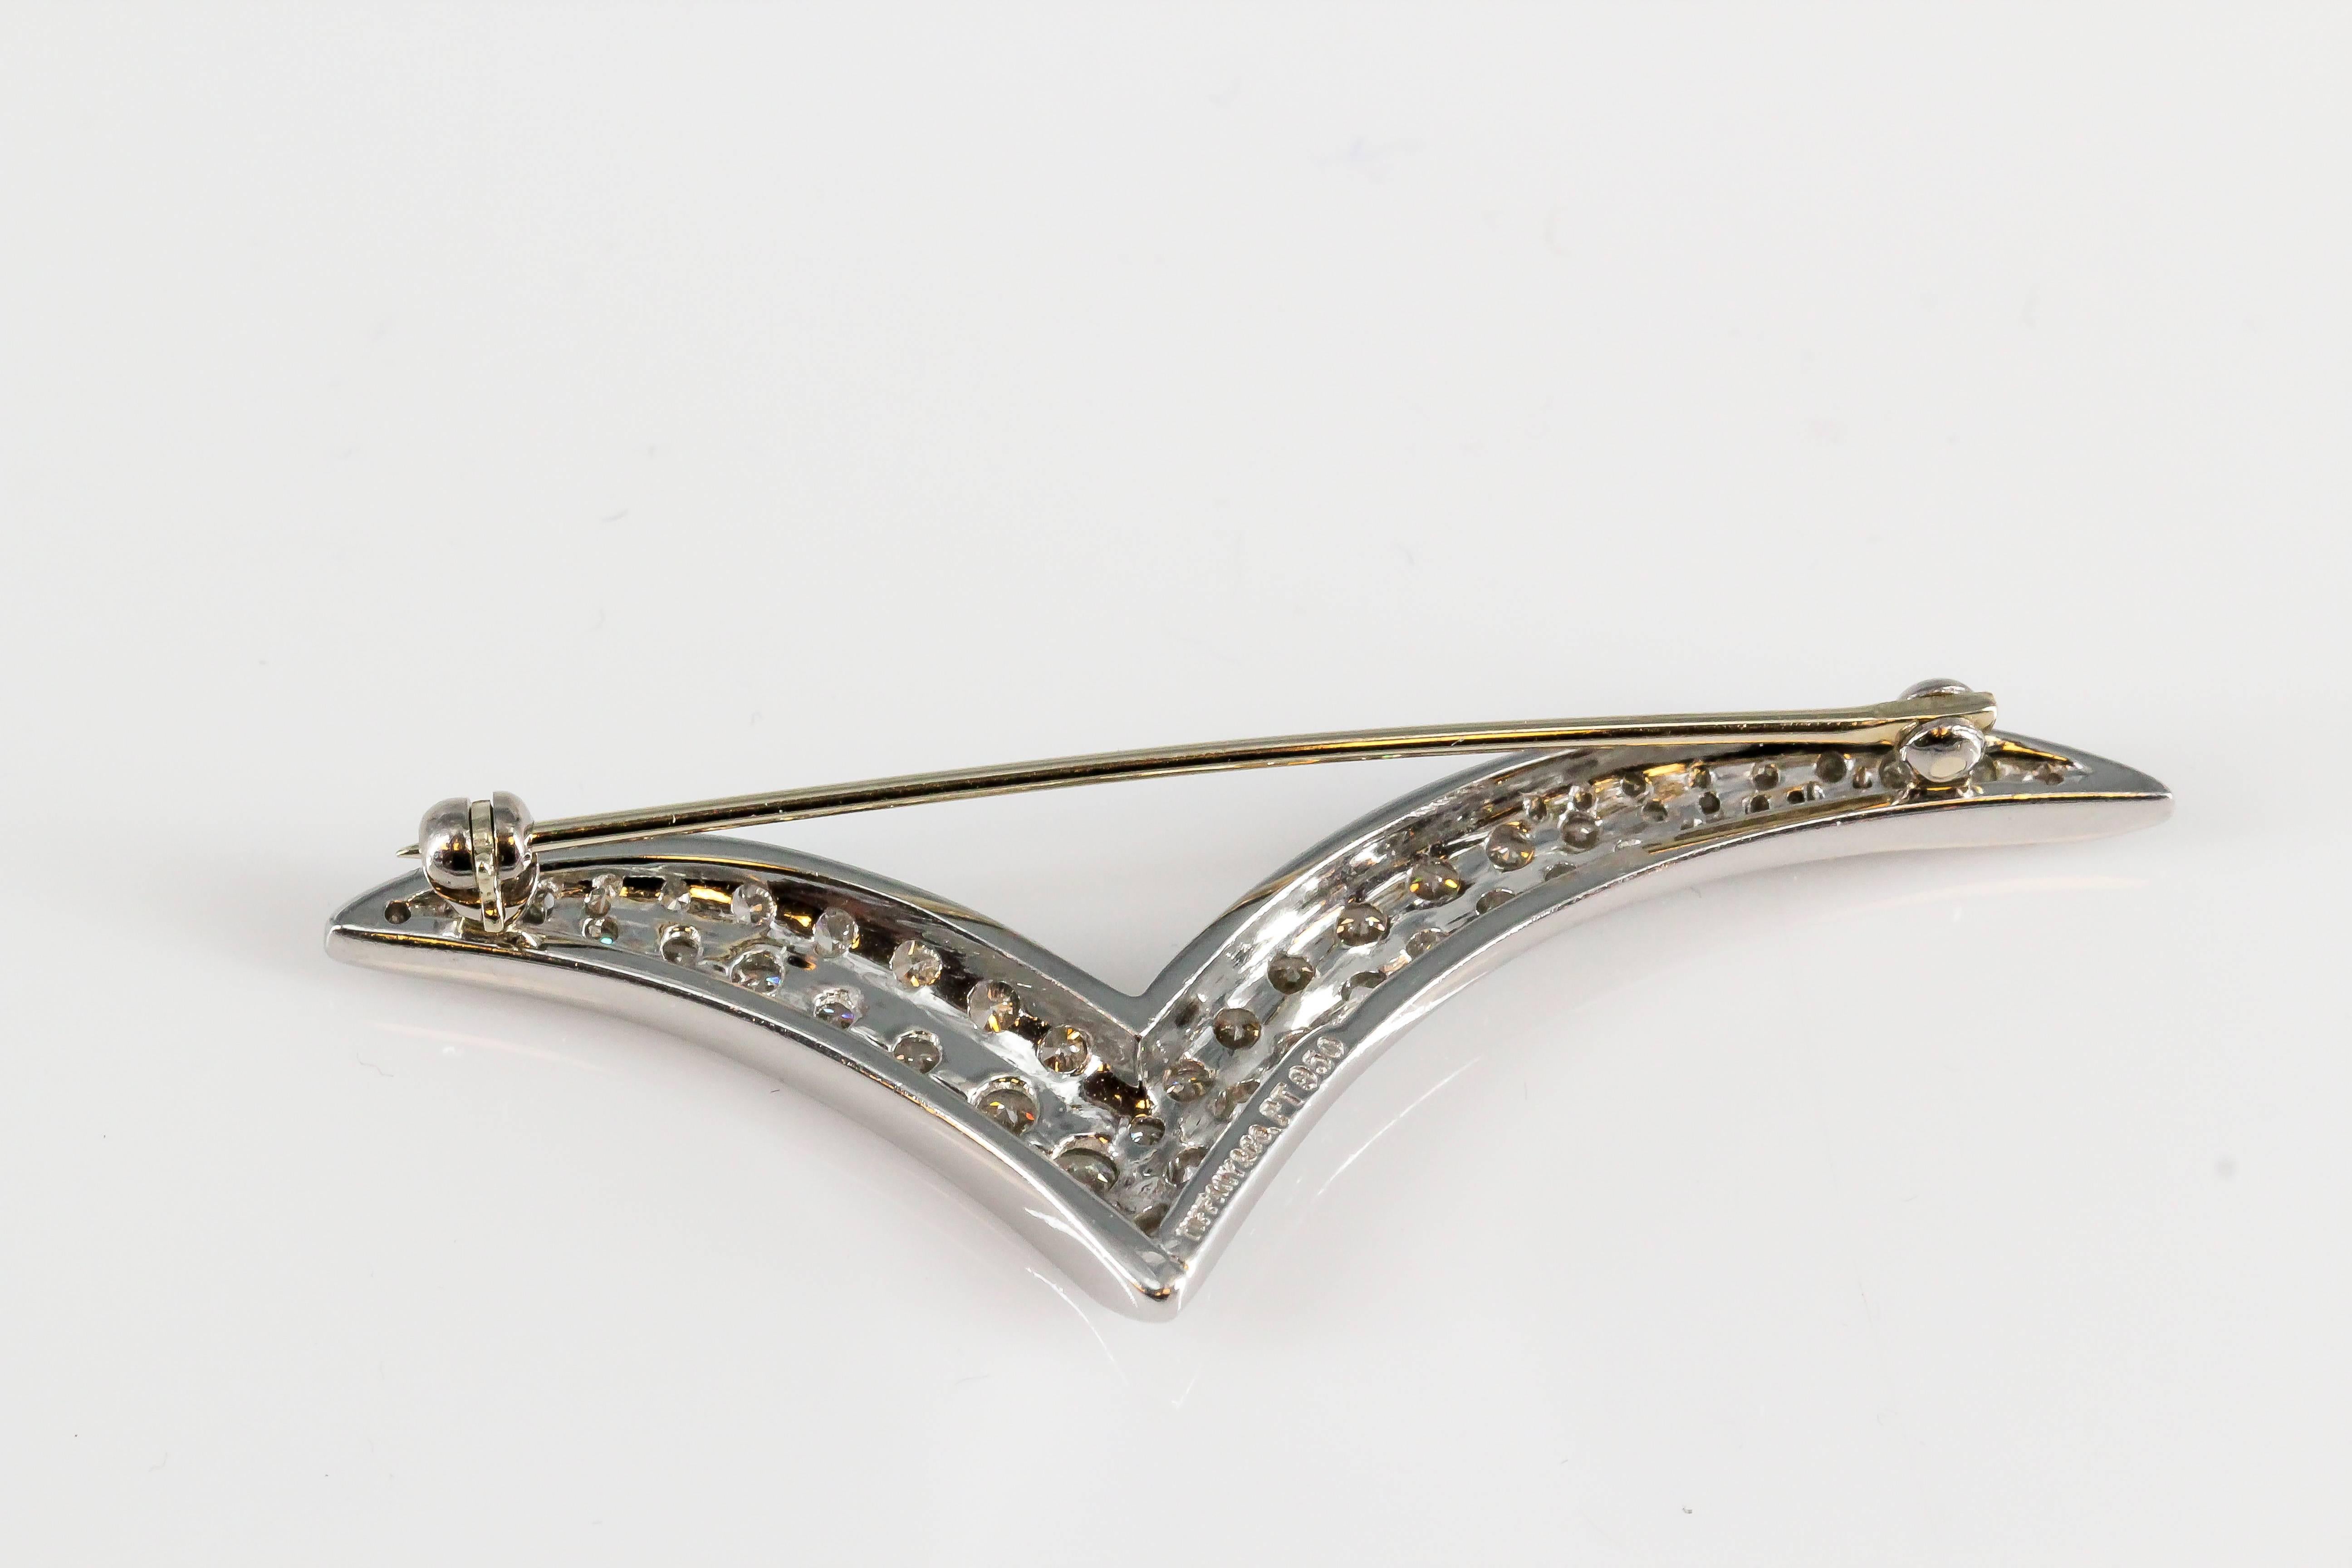 Elegant diamond and platinum brooch by Tiffany & Co. It resembles a seagull and this is the large model. Diamonds are high grade round brilliant cut, over a platinum setting. Beautifully made and easy to wear.

Hallmarks: Tiffany & Co.,